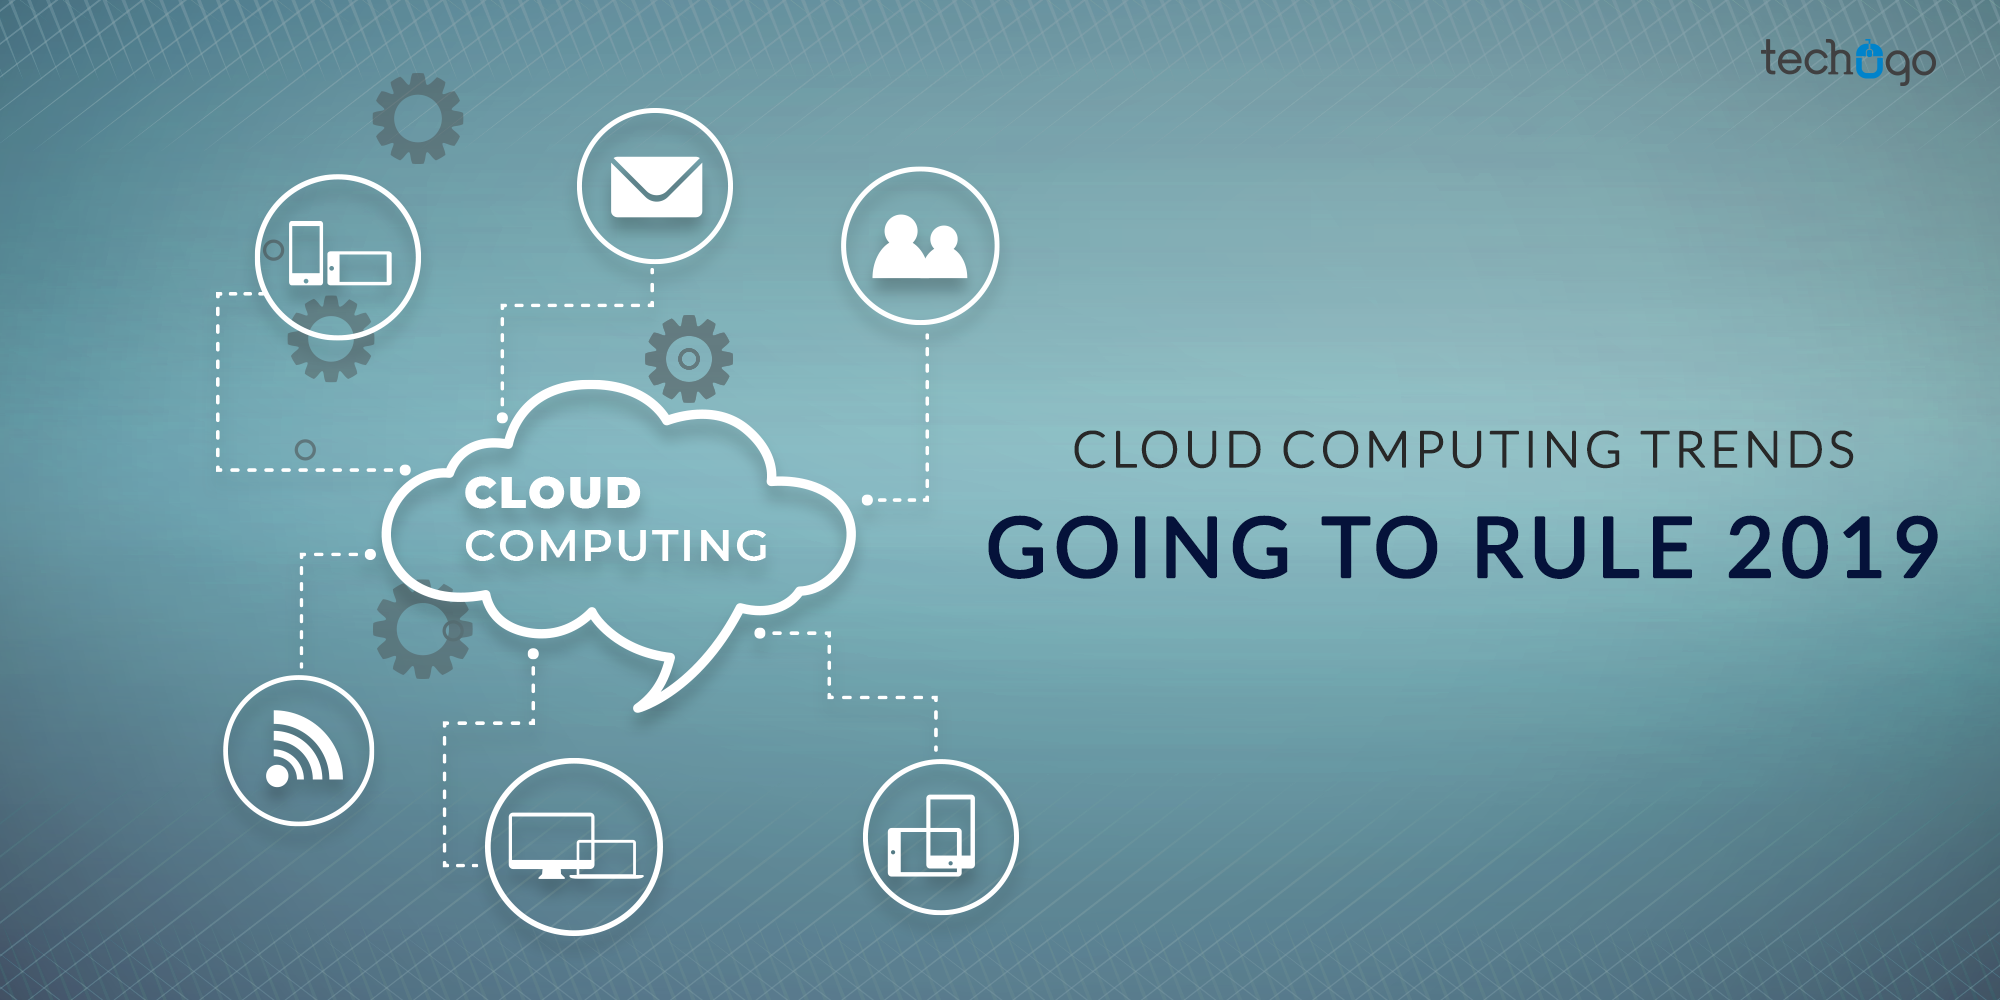 Cloud Computing Trends Going To Rule 2019